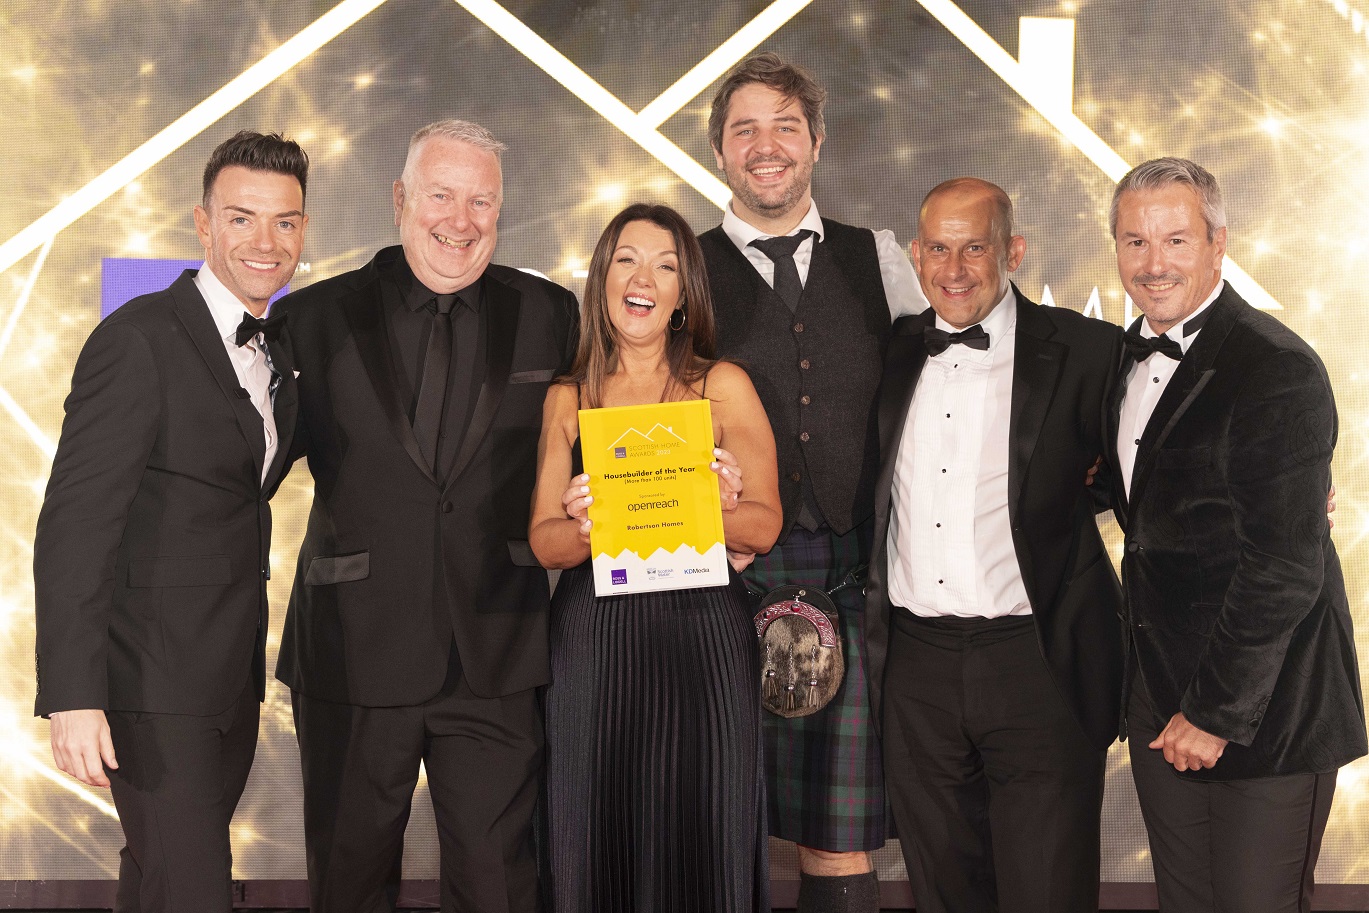 Winners crowned at 16th annual Scottish Home Awards